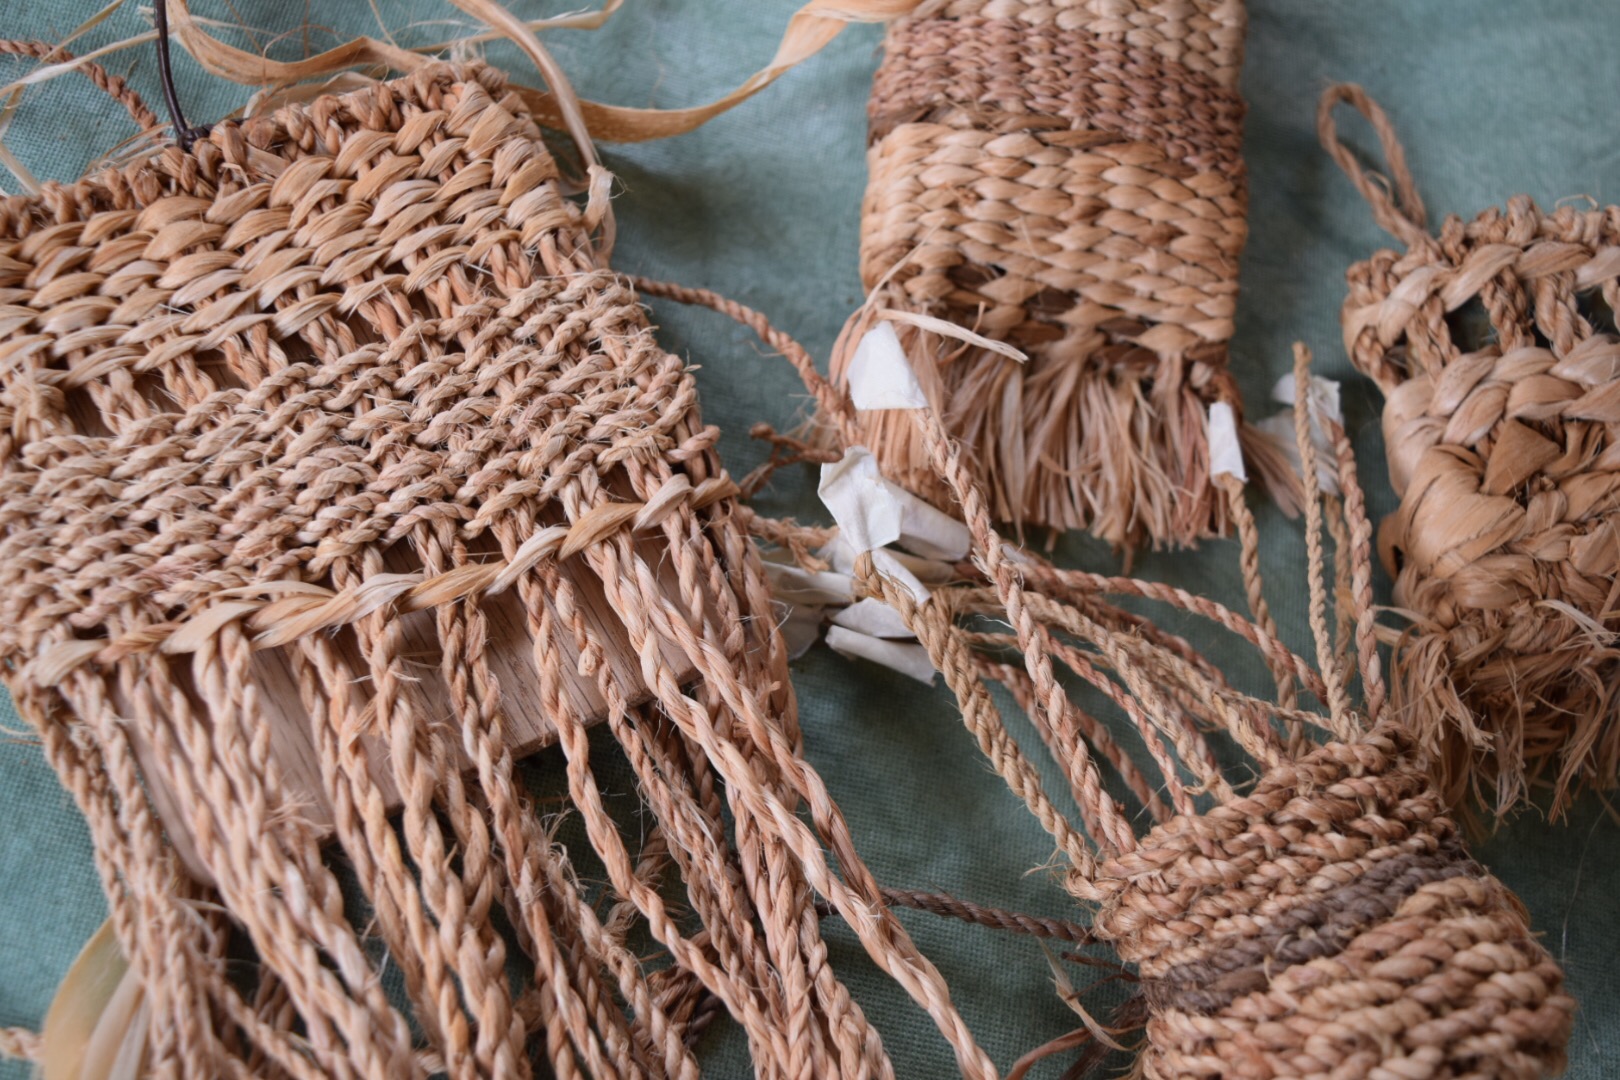 twined basswood fiber bags